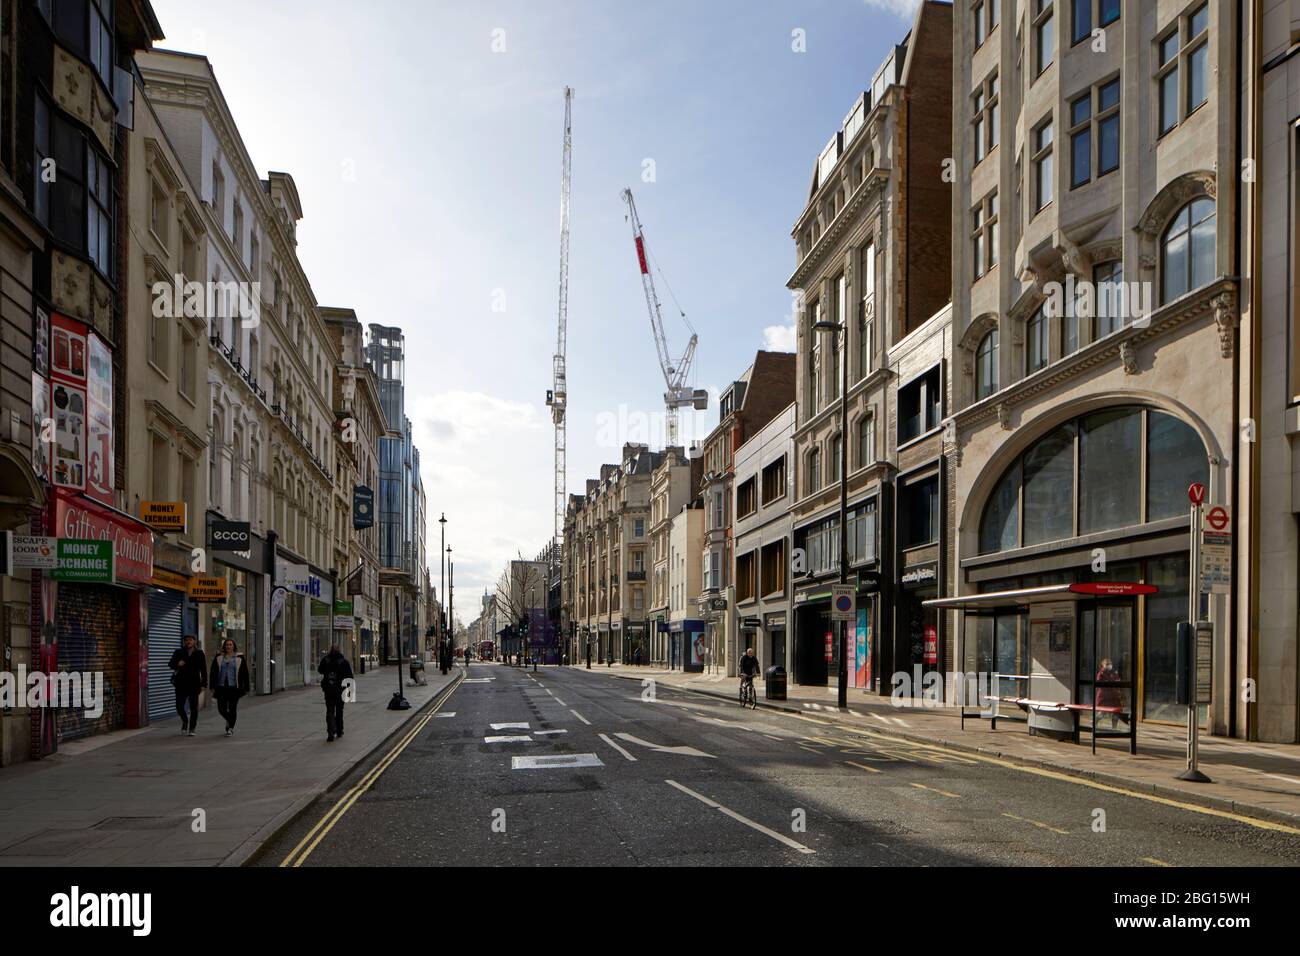 Empty deserted street of Oxford Street during restricted travel of Coronavirus COVID-19 Lockdown in London W1, England Stock Photo